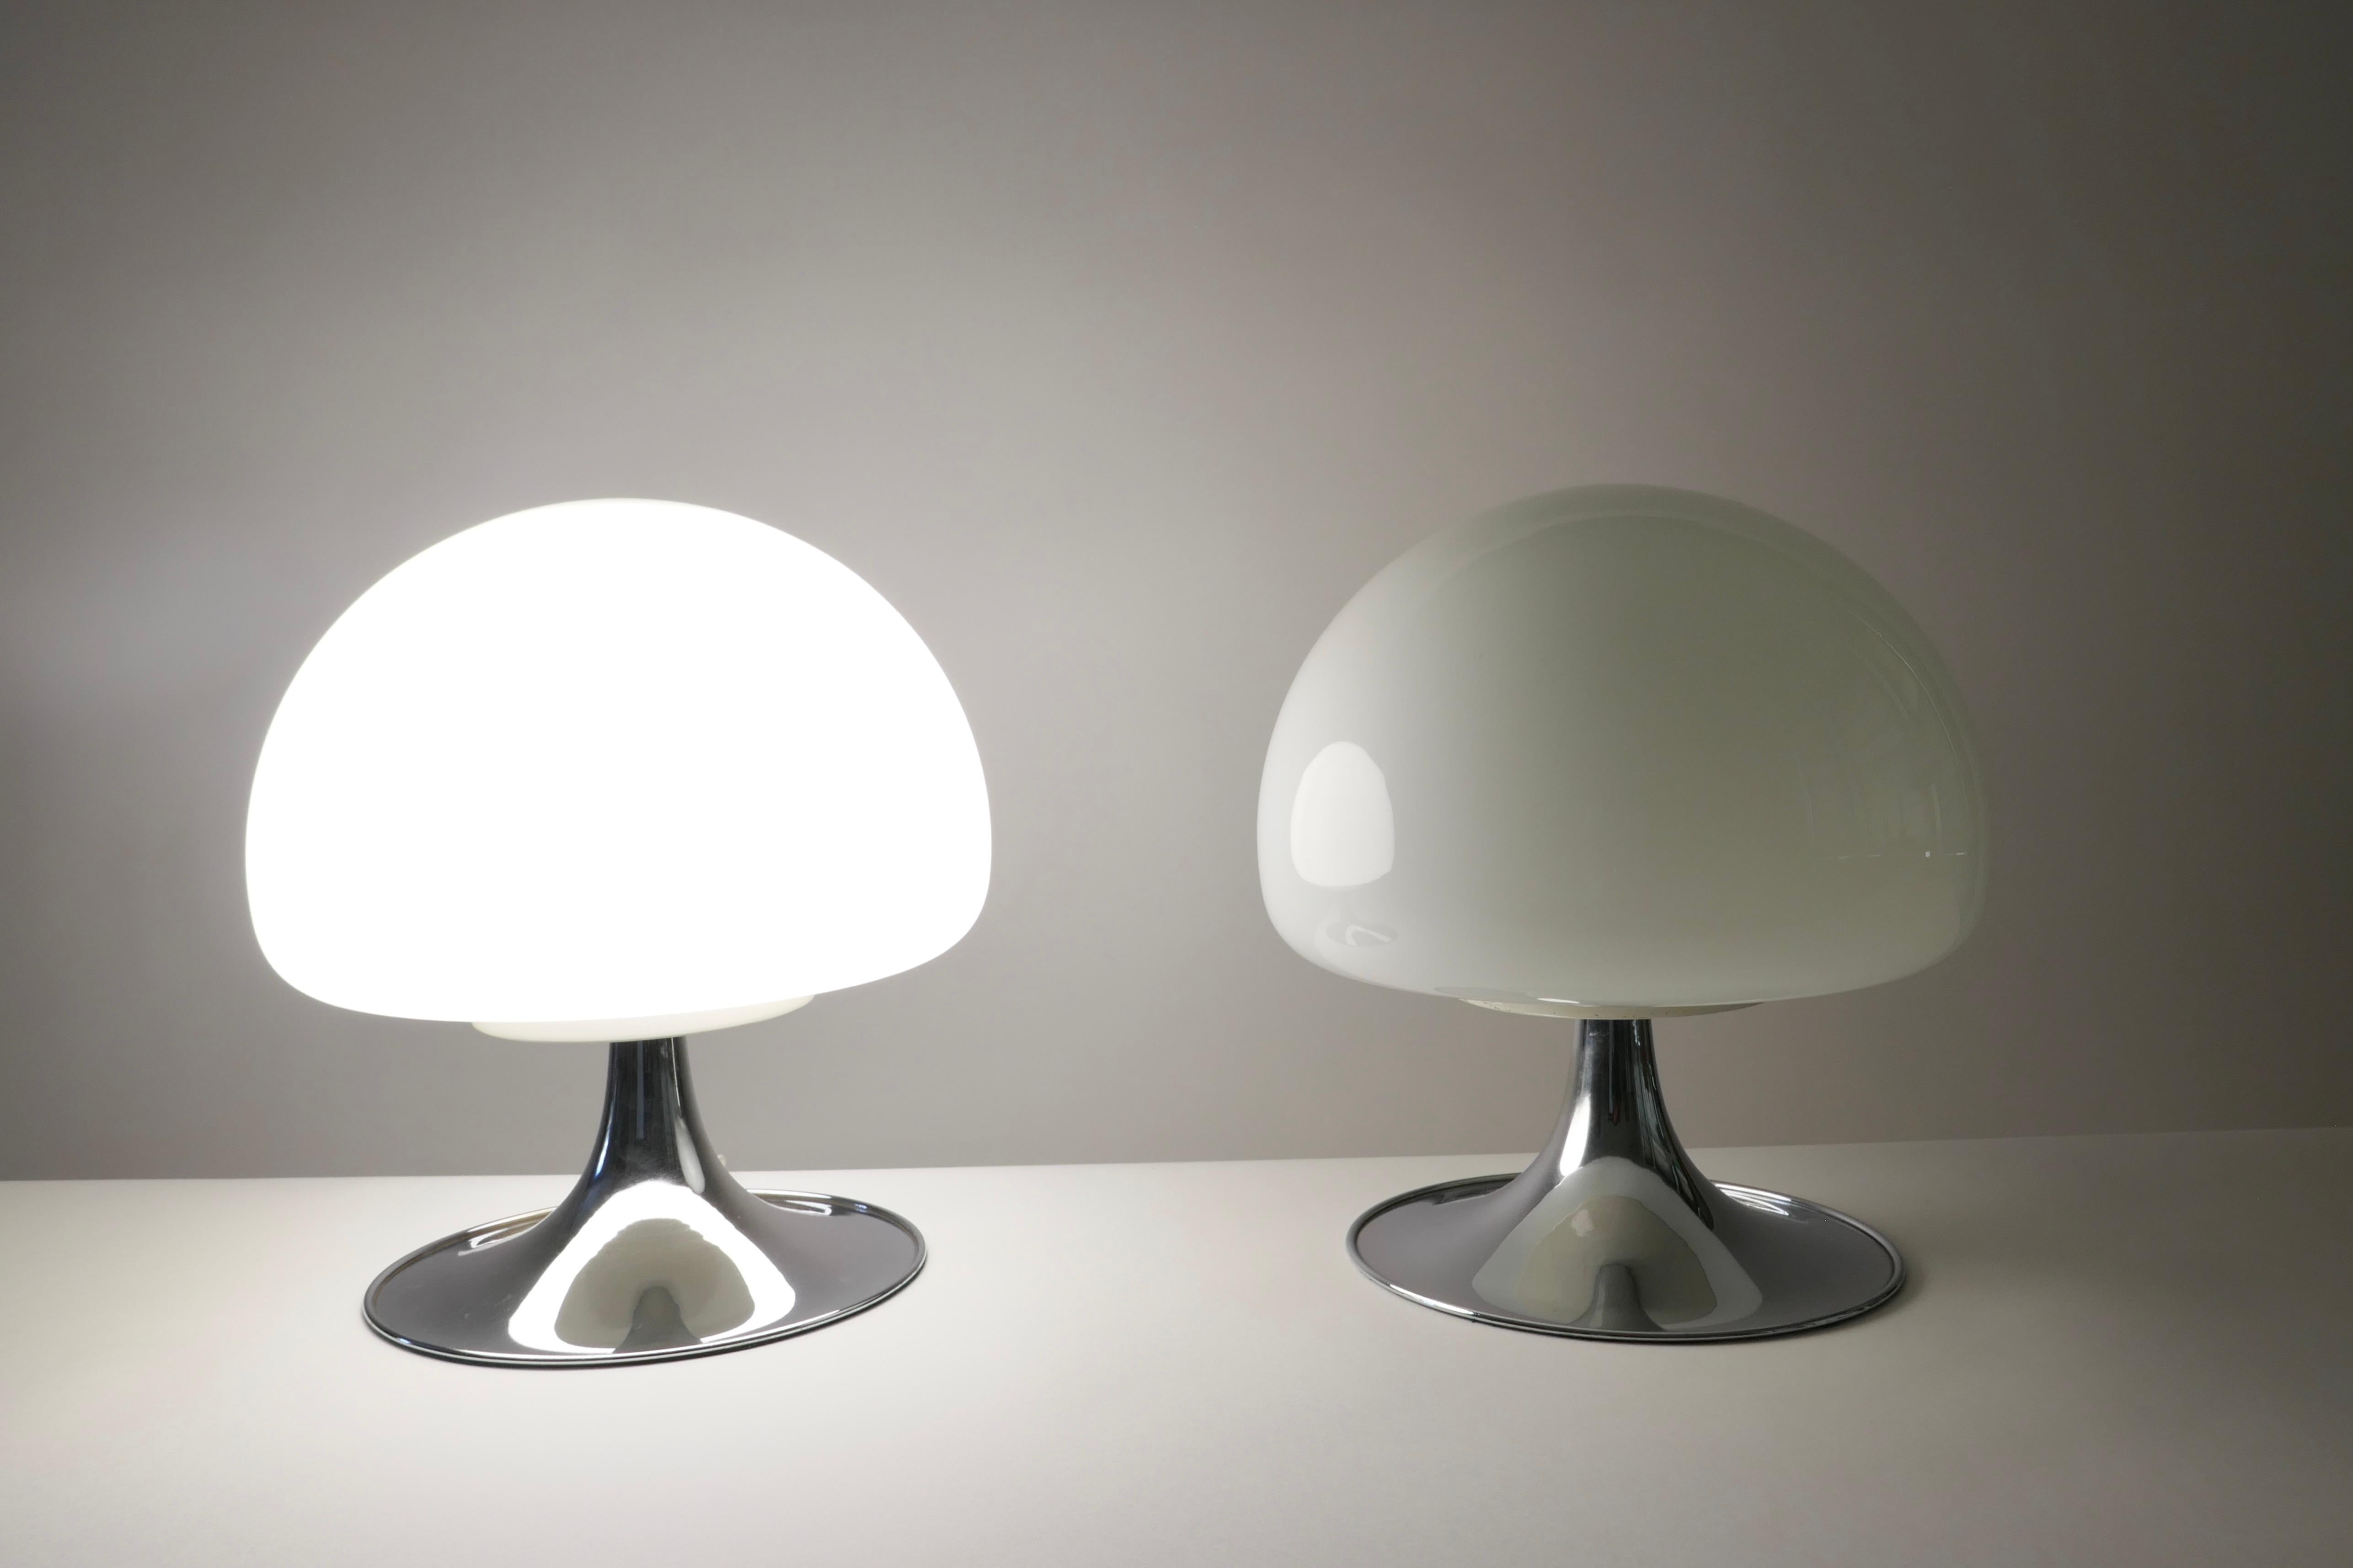 Pair of table lamps designed by Goffredo Reggiani and produced by Reggiani, Italy, in the 1960s. The base is in chromed steel in the shape of a trumpet where a mushroom-shaped opal glass lampshade is defined. It is in its original condition and in